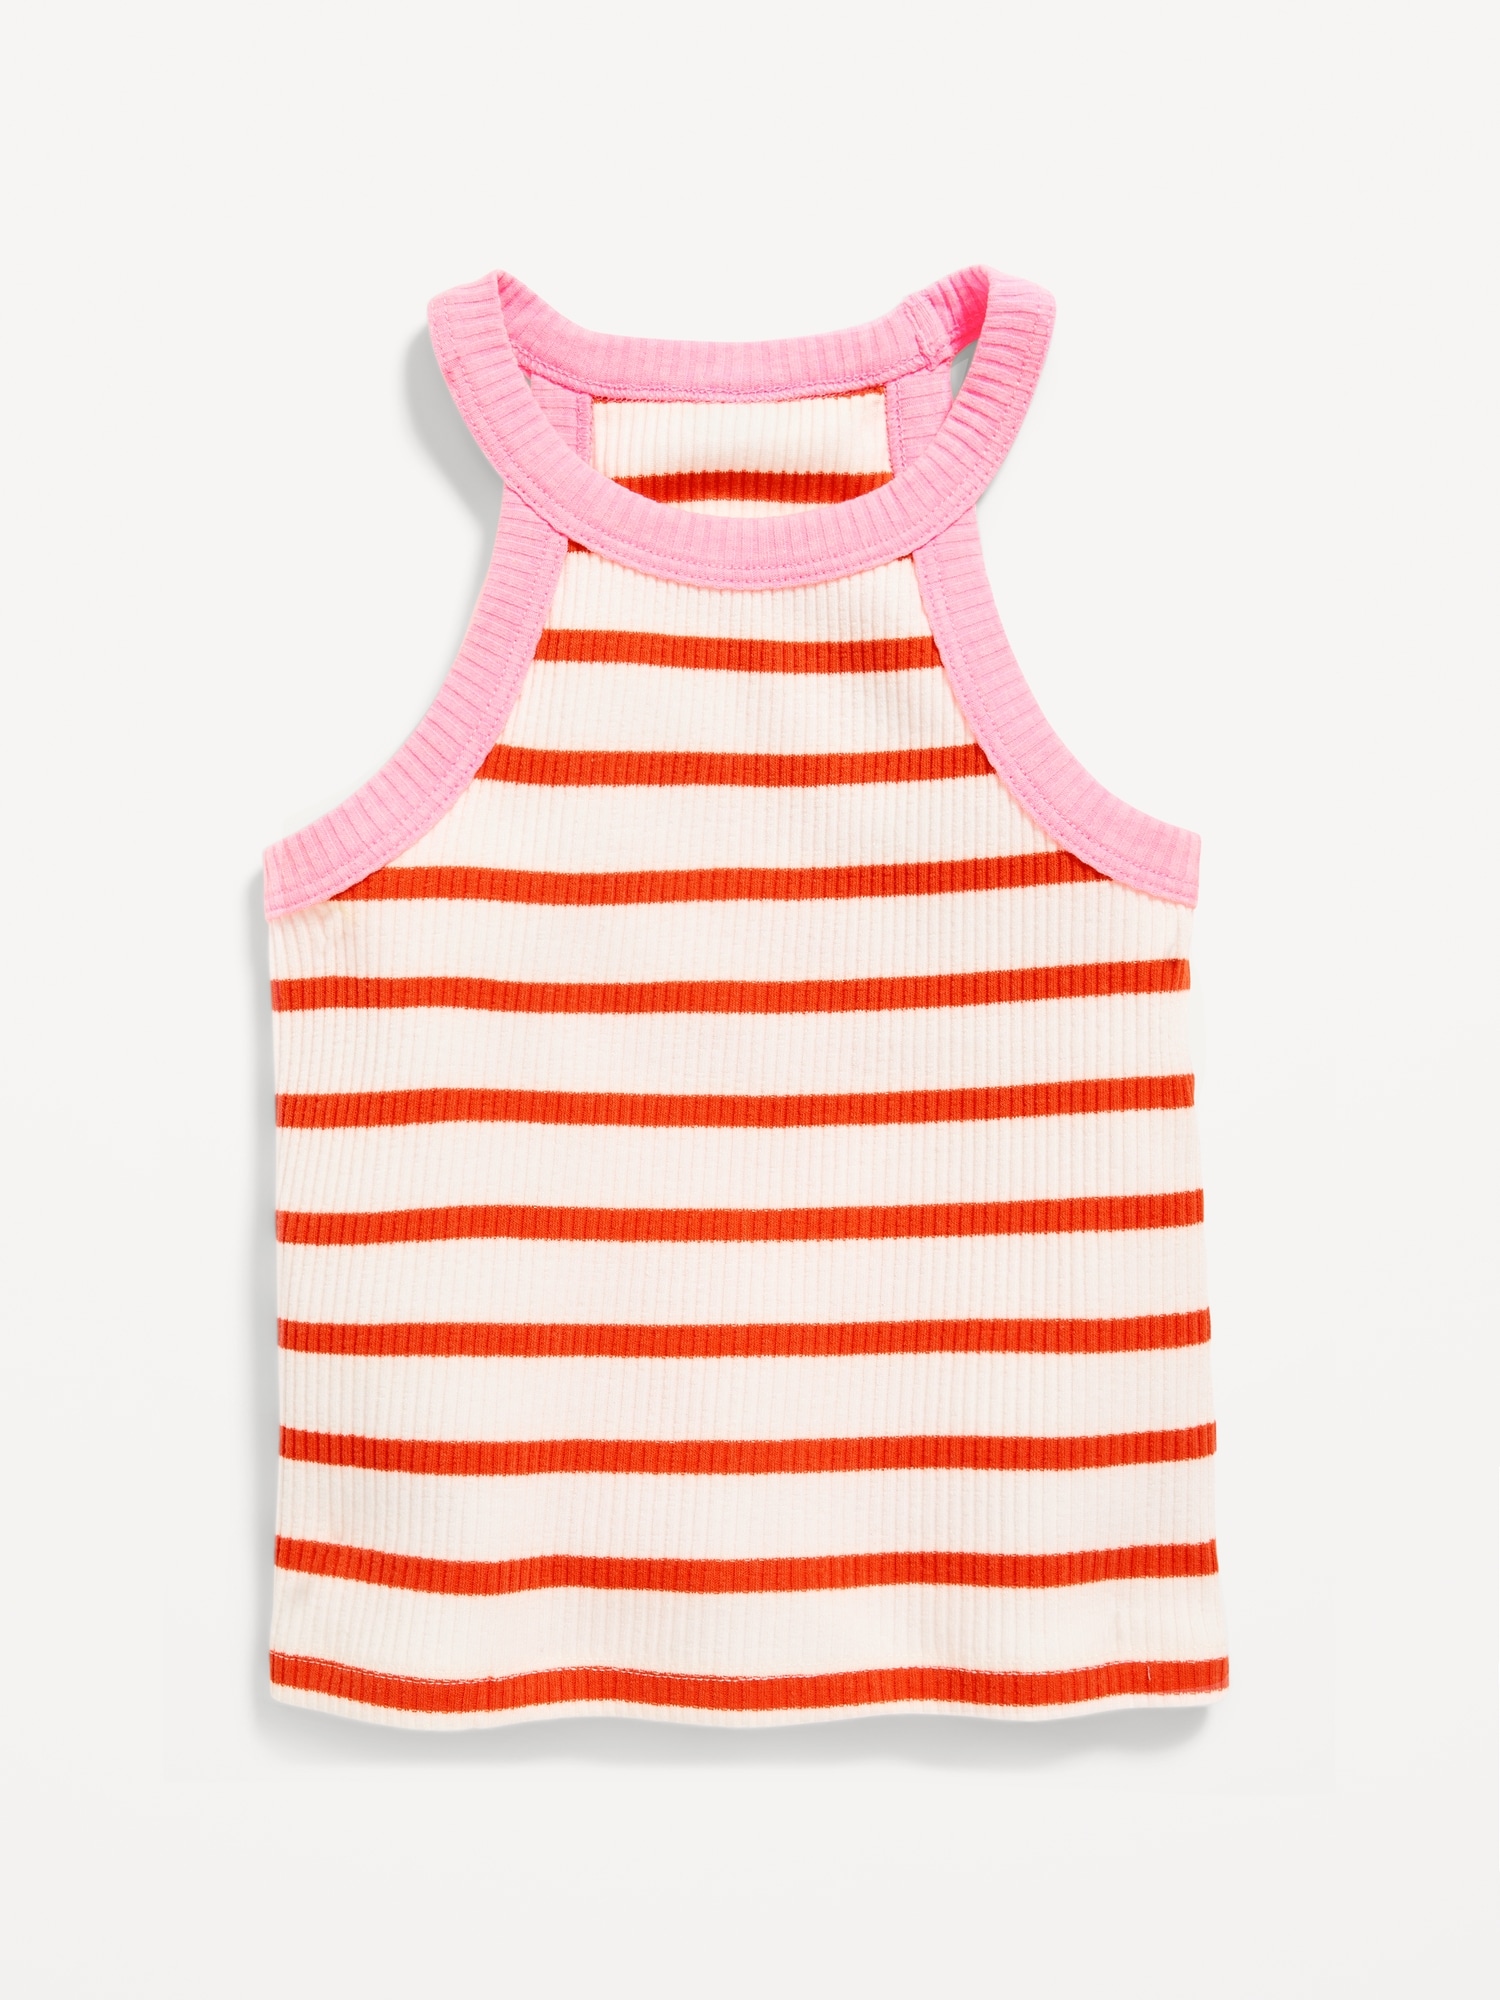 Fitted Halter Tank Top for Toddler Girls